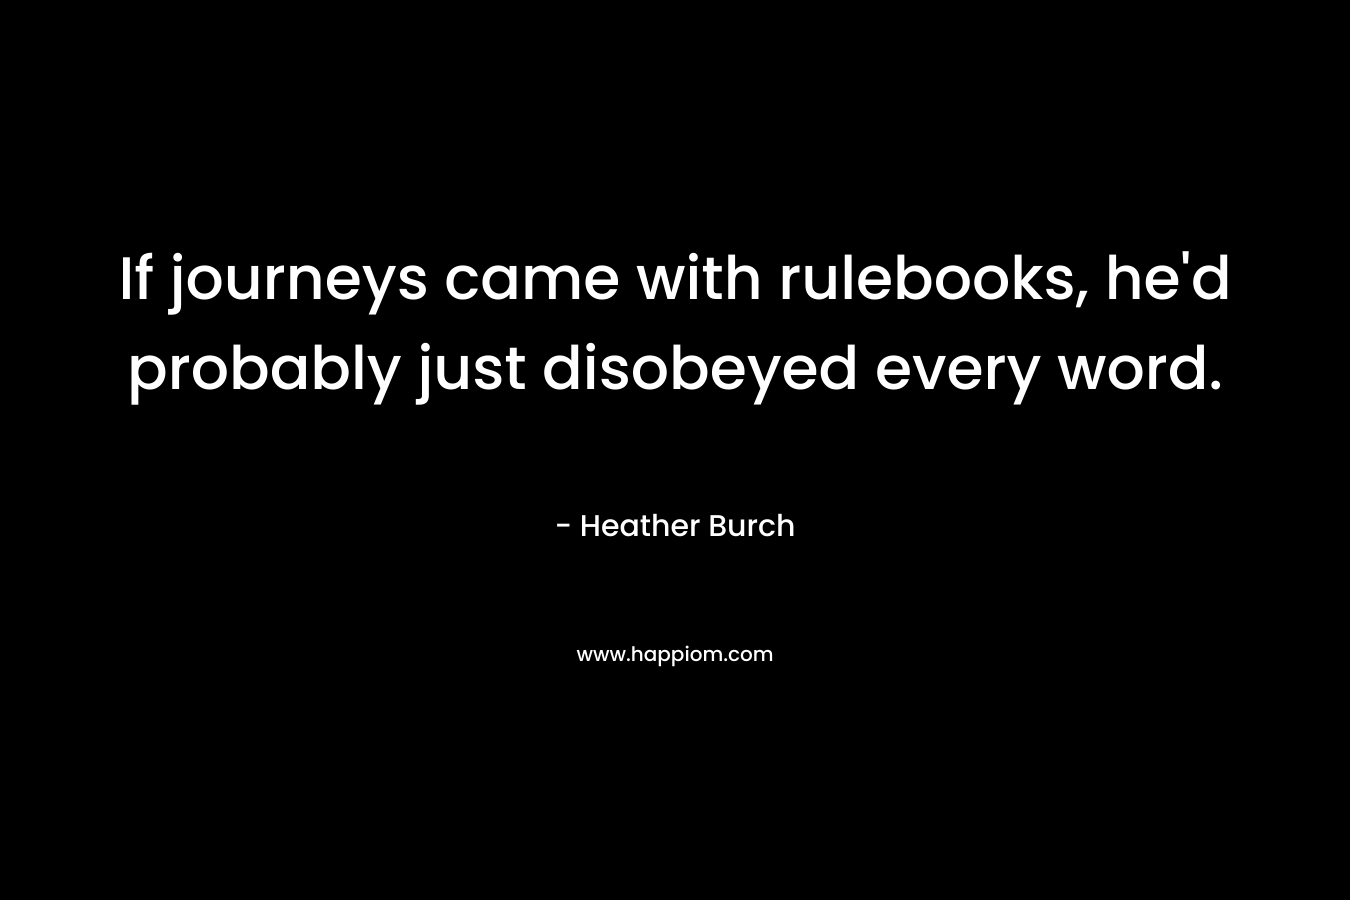 If journeys came with rulebooks, he’d probably just disobeyed every word. – Heather Burch